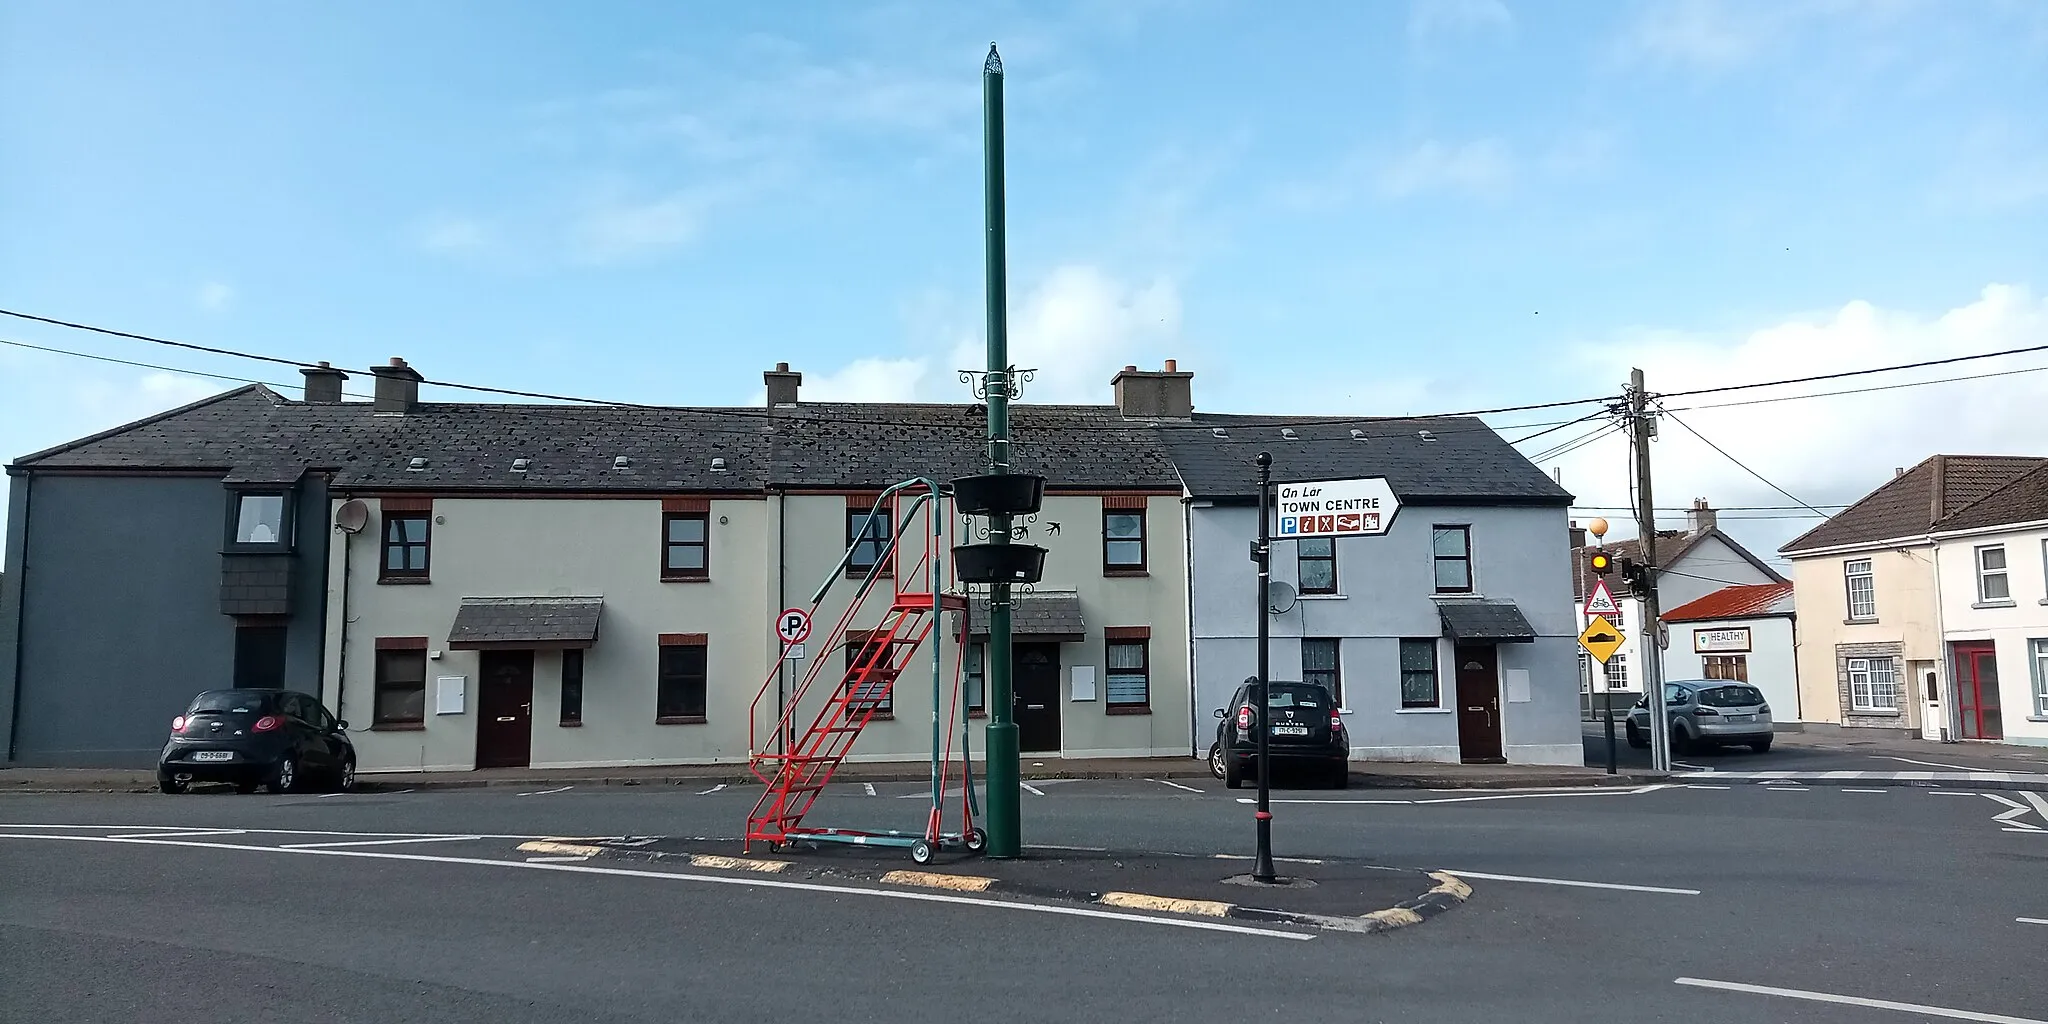 Photo showing: sewer vent on Mitchel Street, Dungarvan. According to the sticker on the shaft, it was made by Jackson Engineering Castlebar. It is one of several models they make, and this one might have replaced an older one at this location.